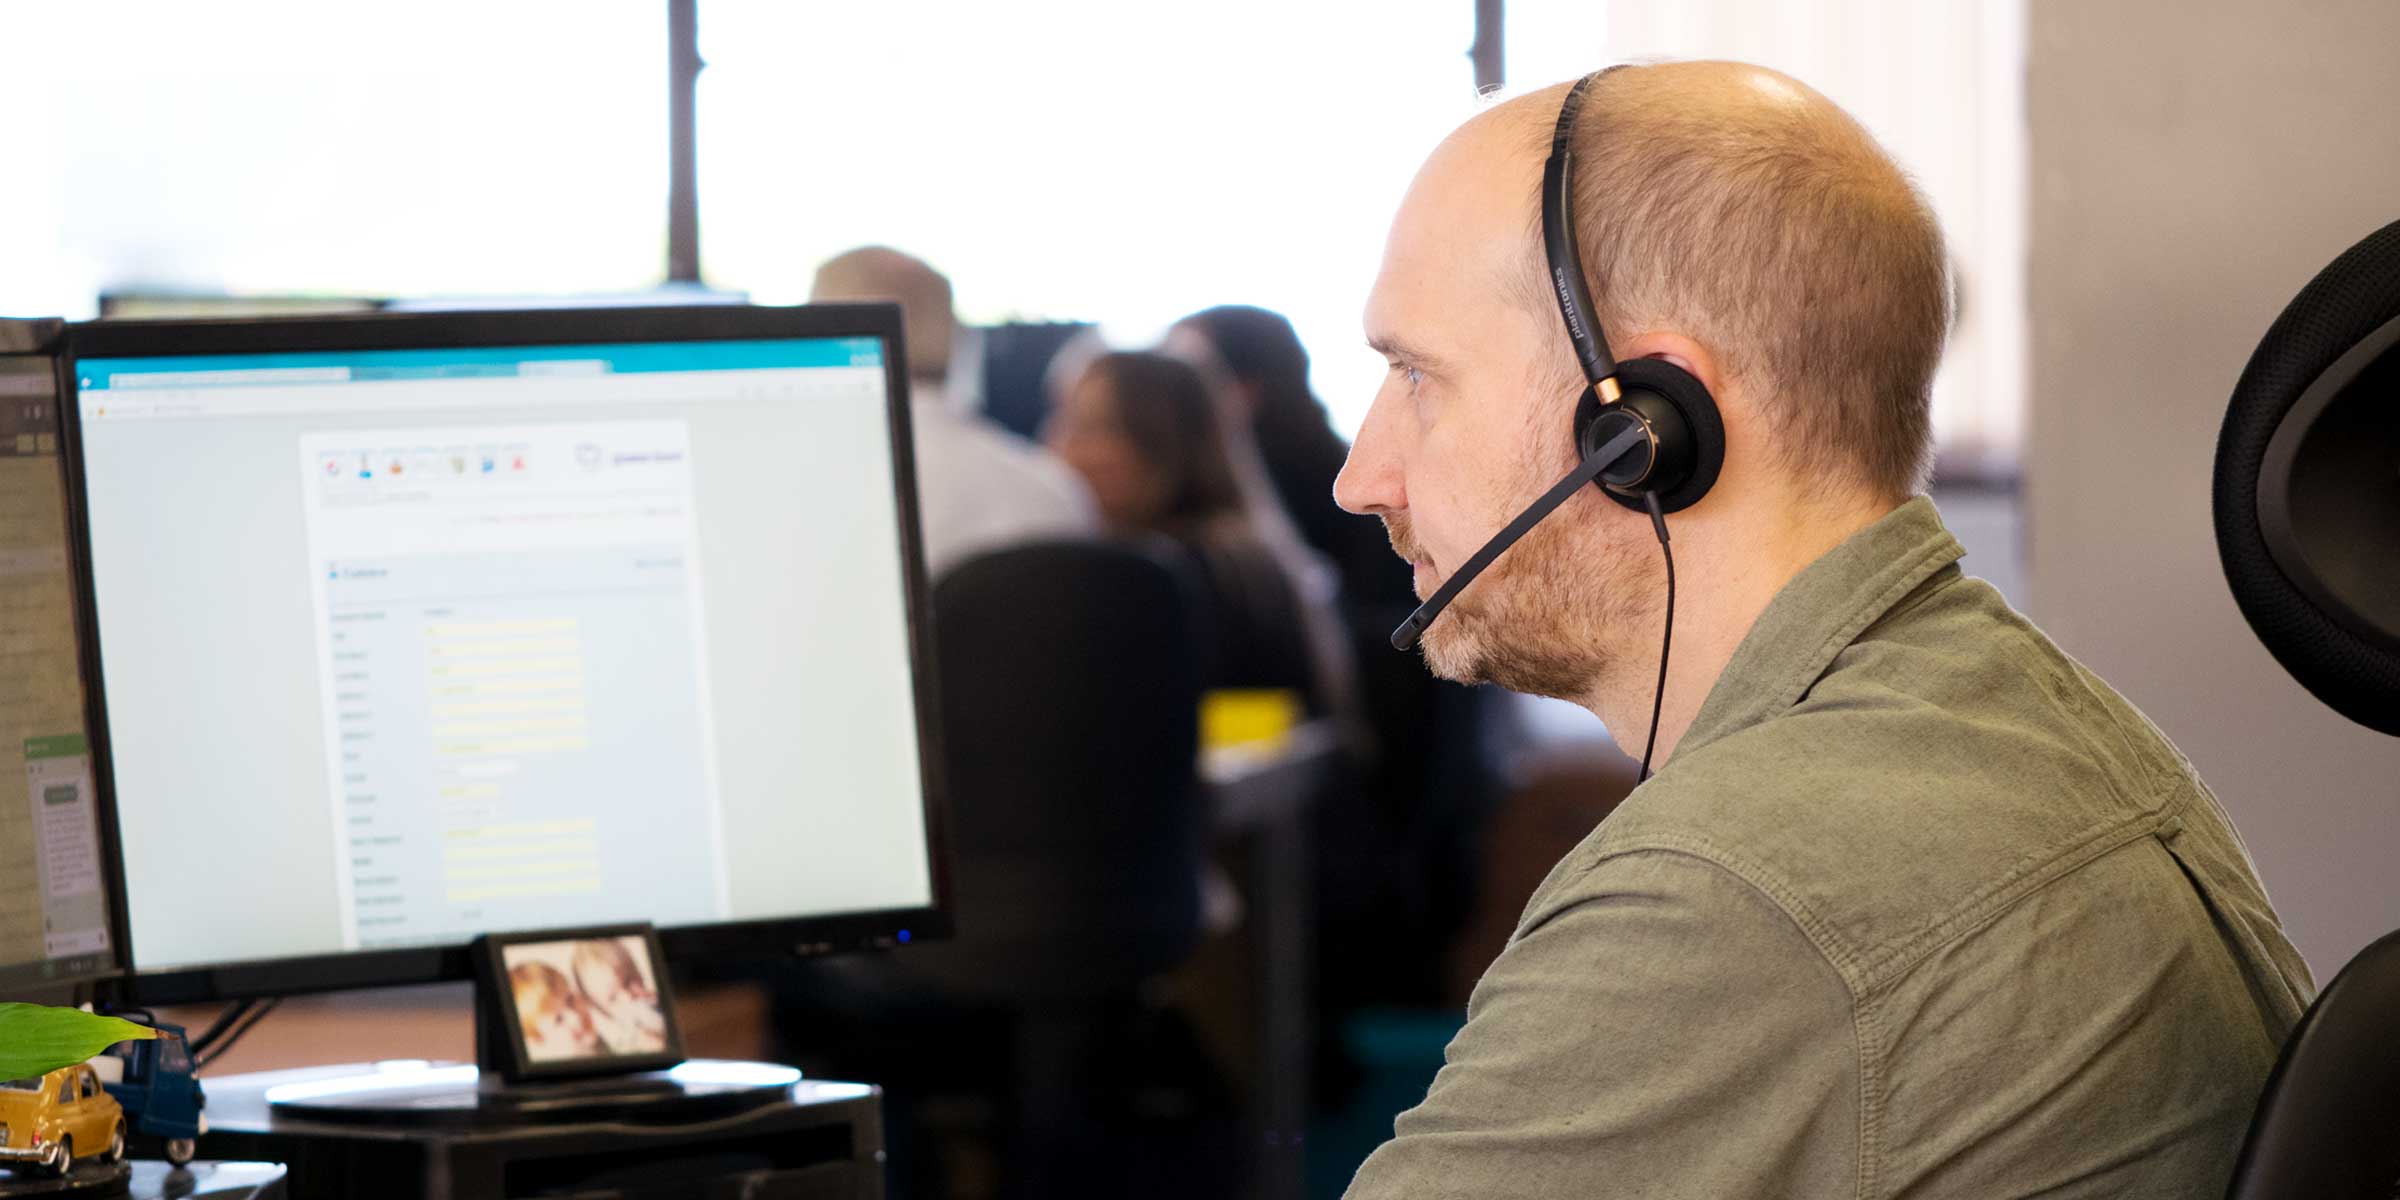 A customer service agent with a headset on and at his computer